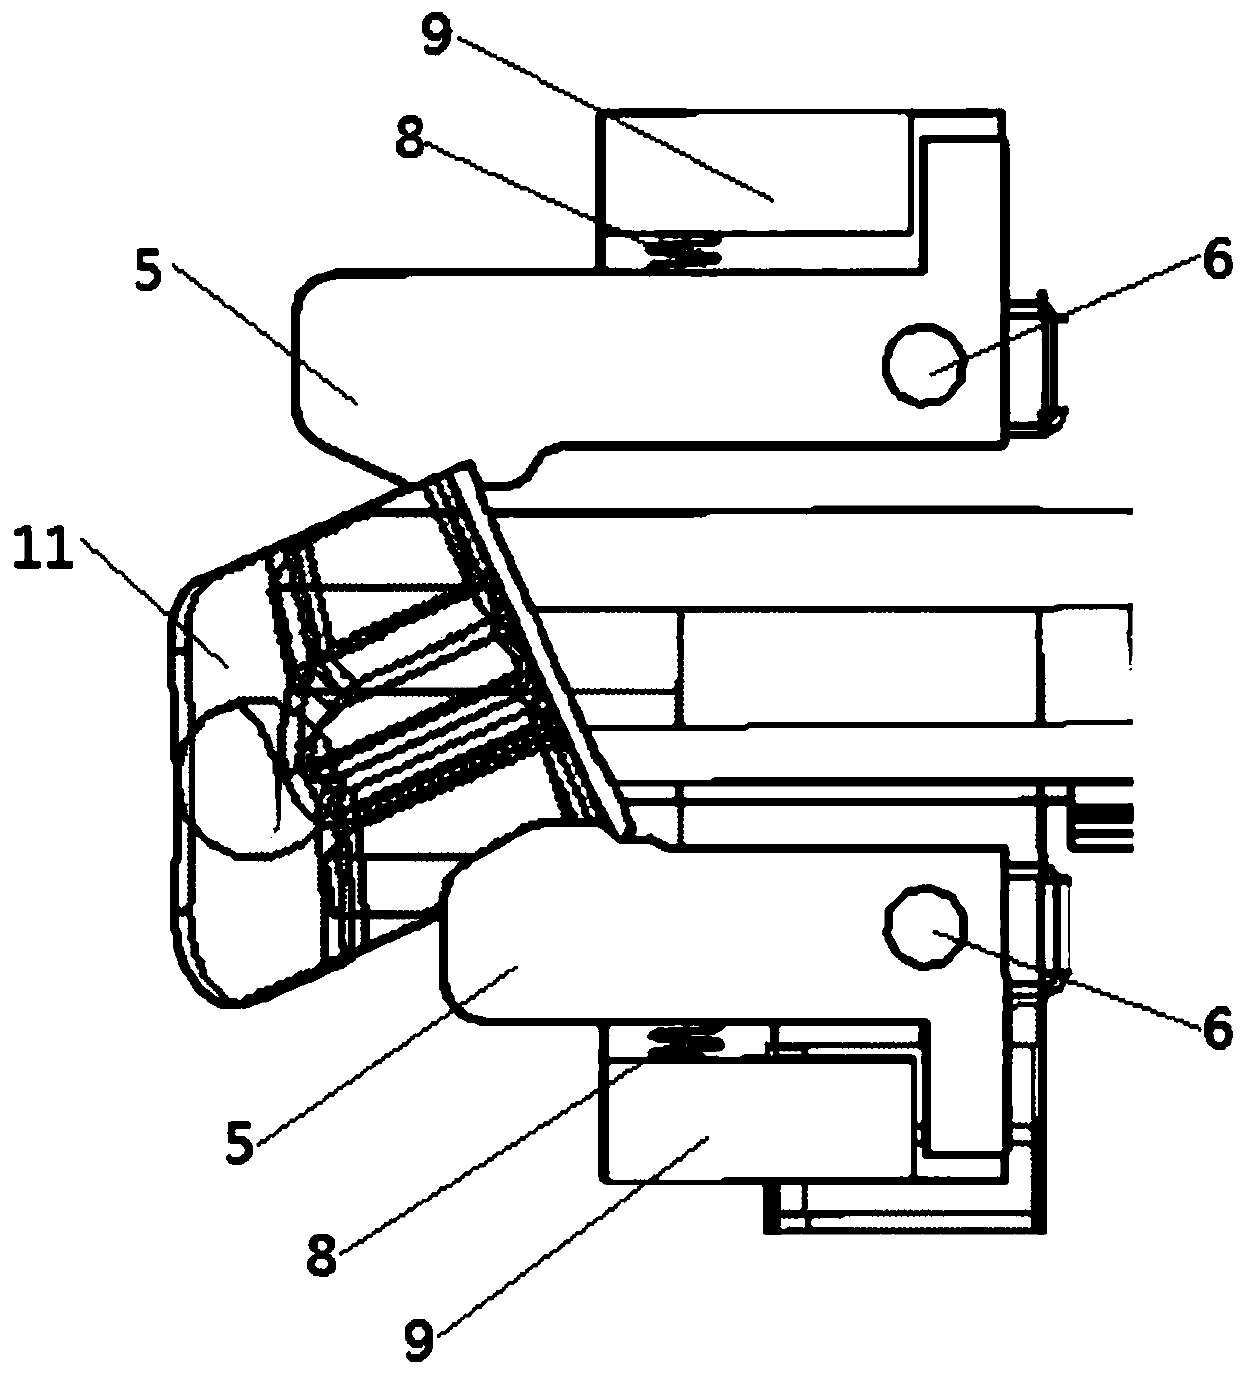 Spring clamp used for feeding